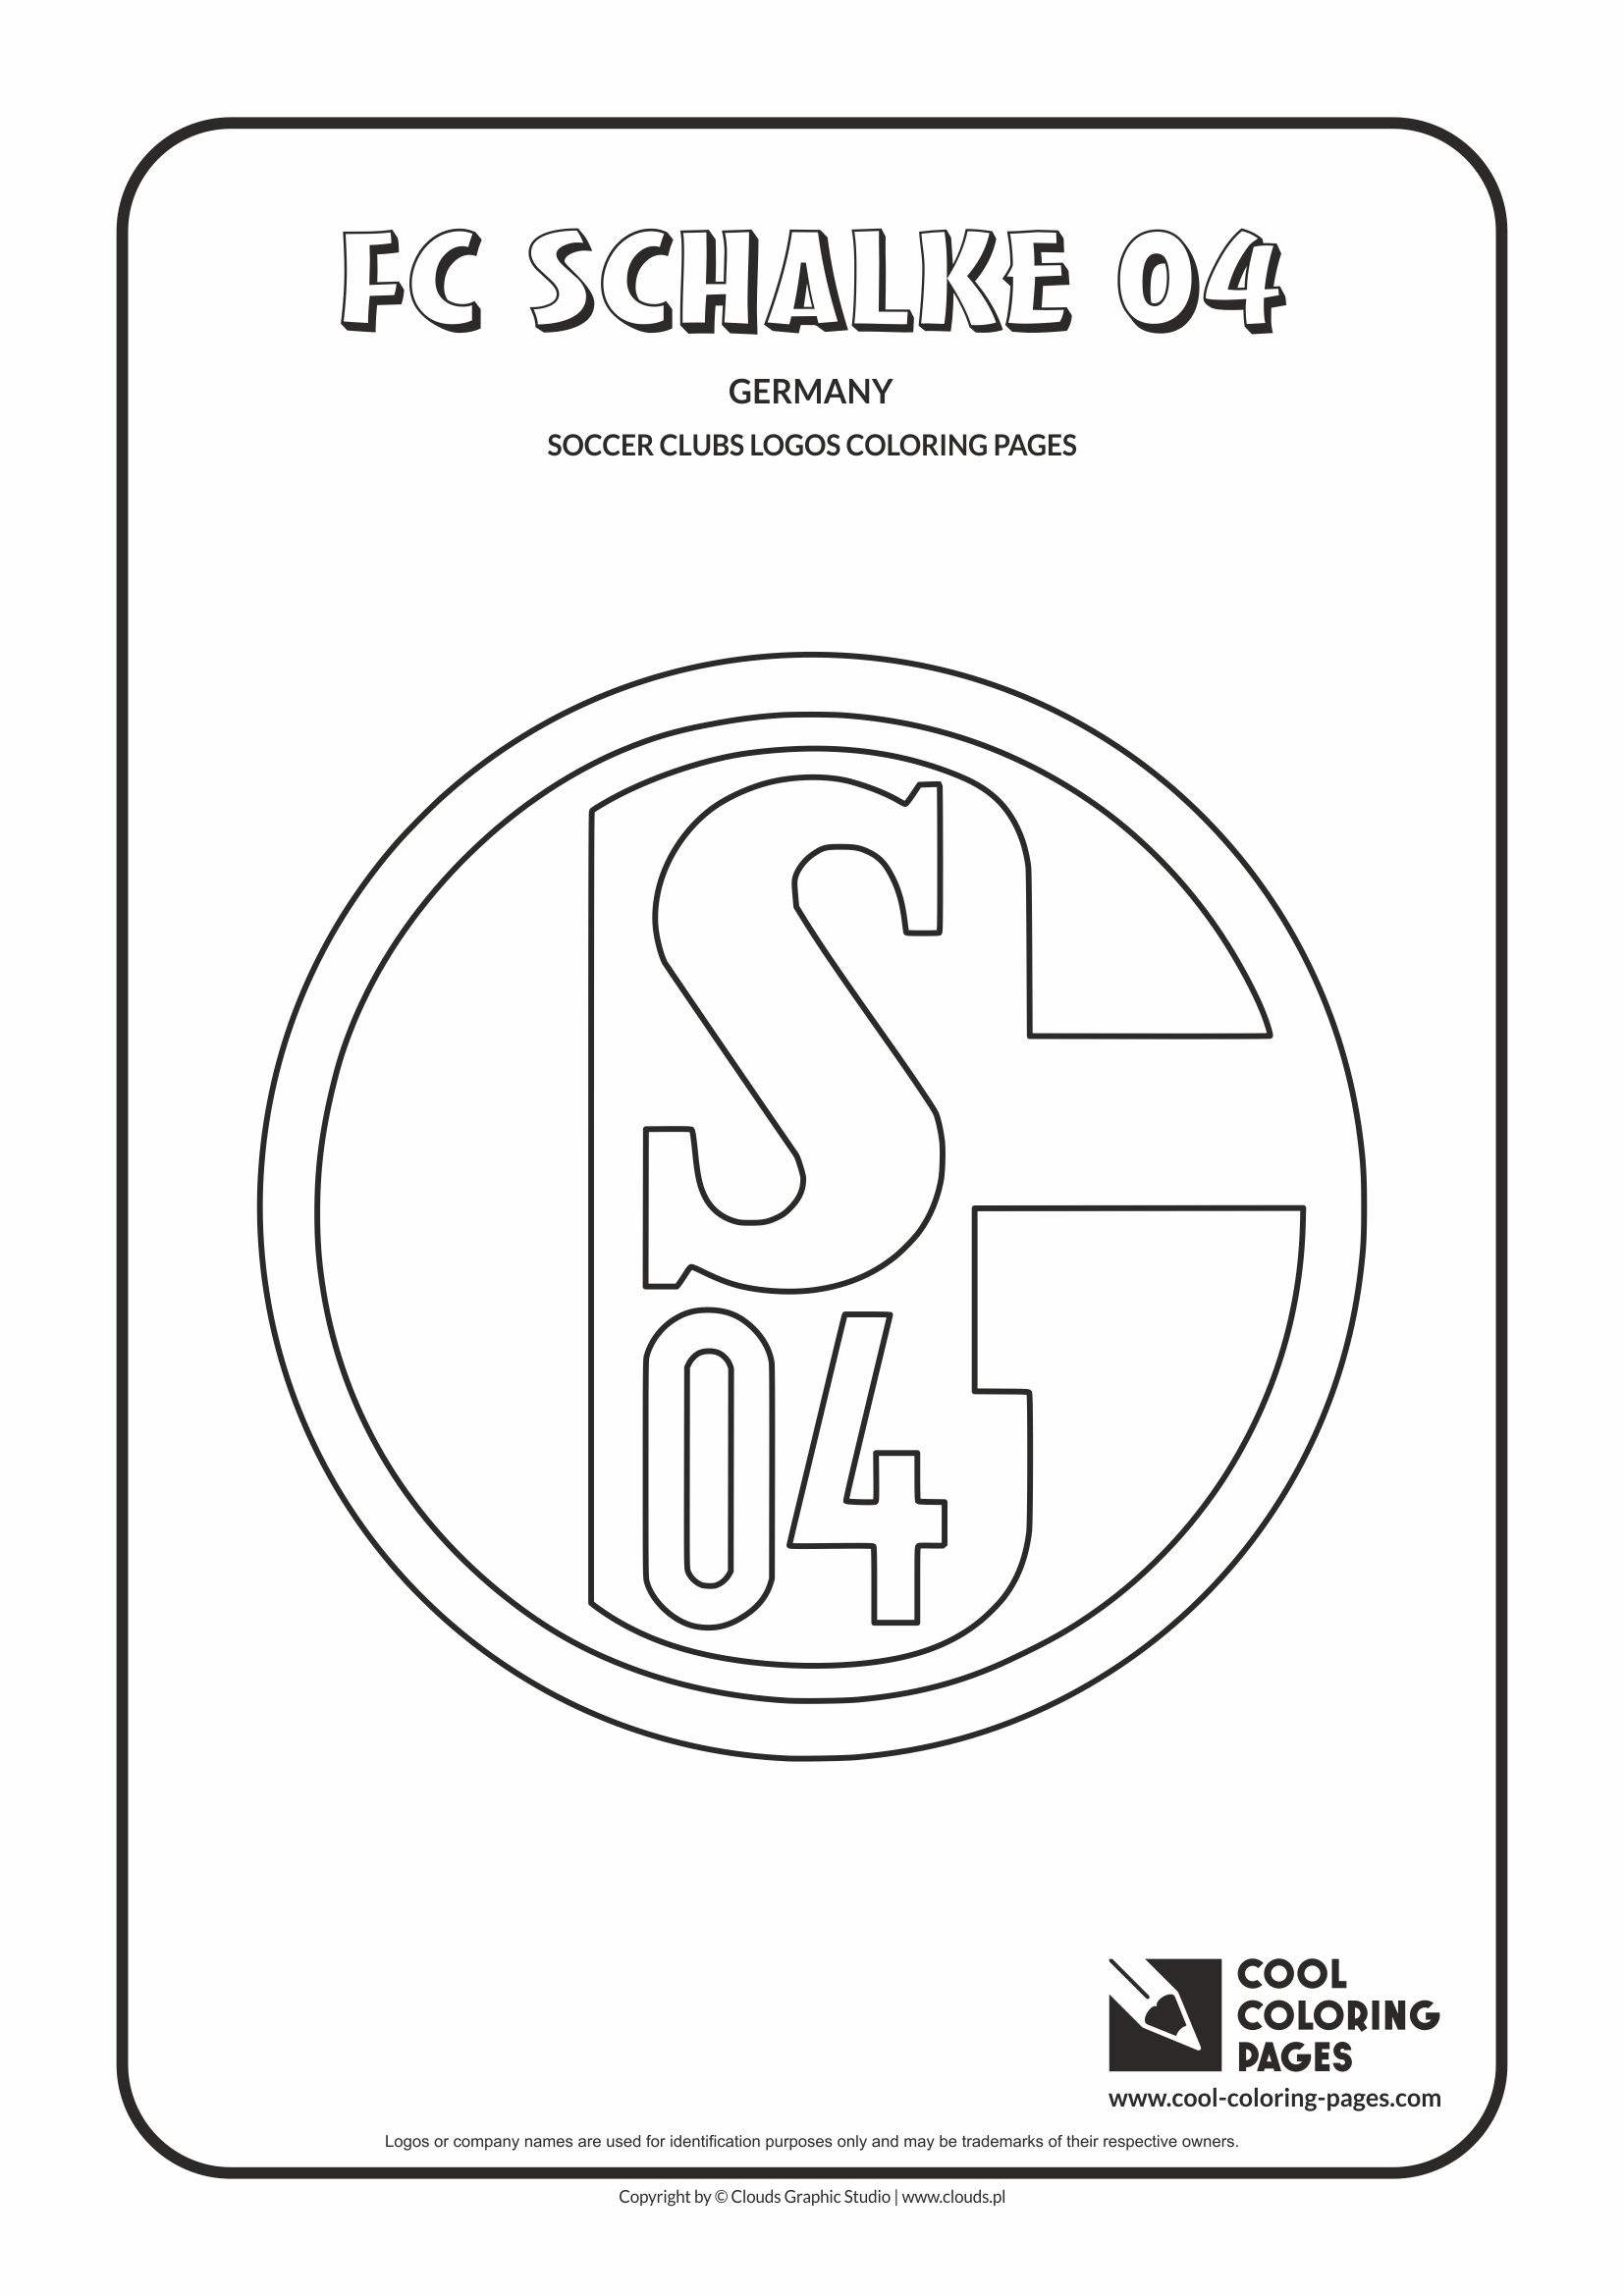 FC Schalke 04 logo coloring / Coloring page with FC Schalke 04 logo / FC Schalke 04 logo colouring page.